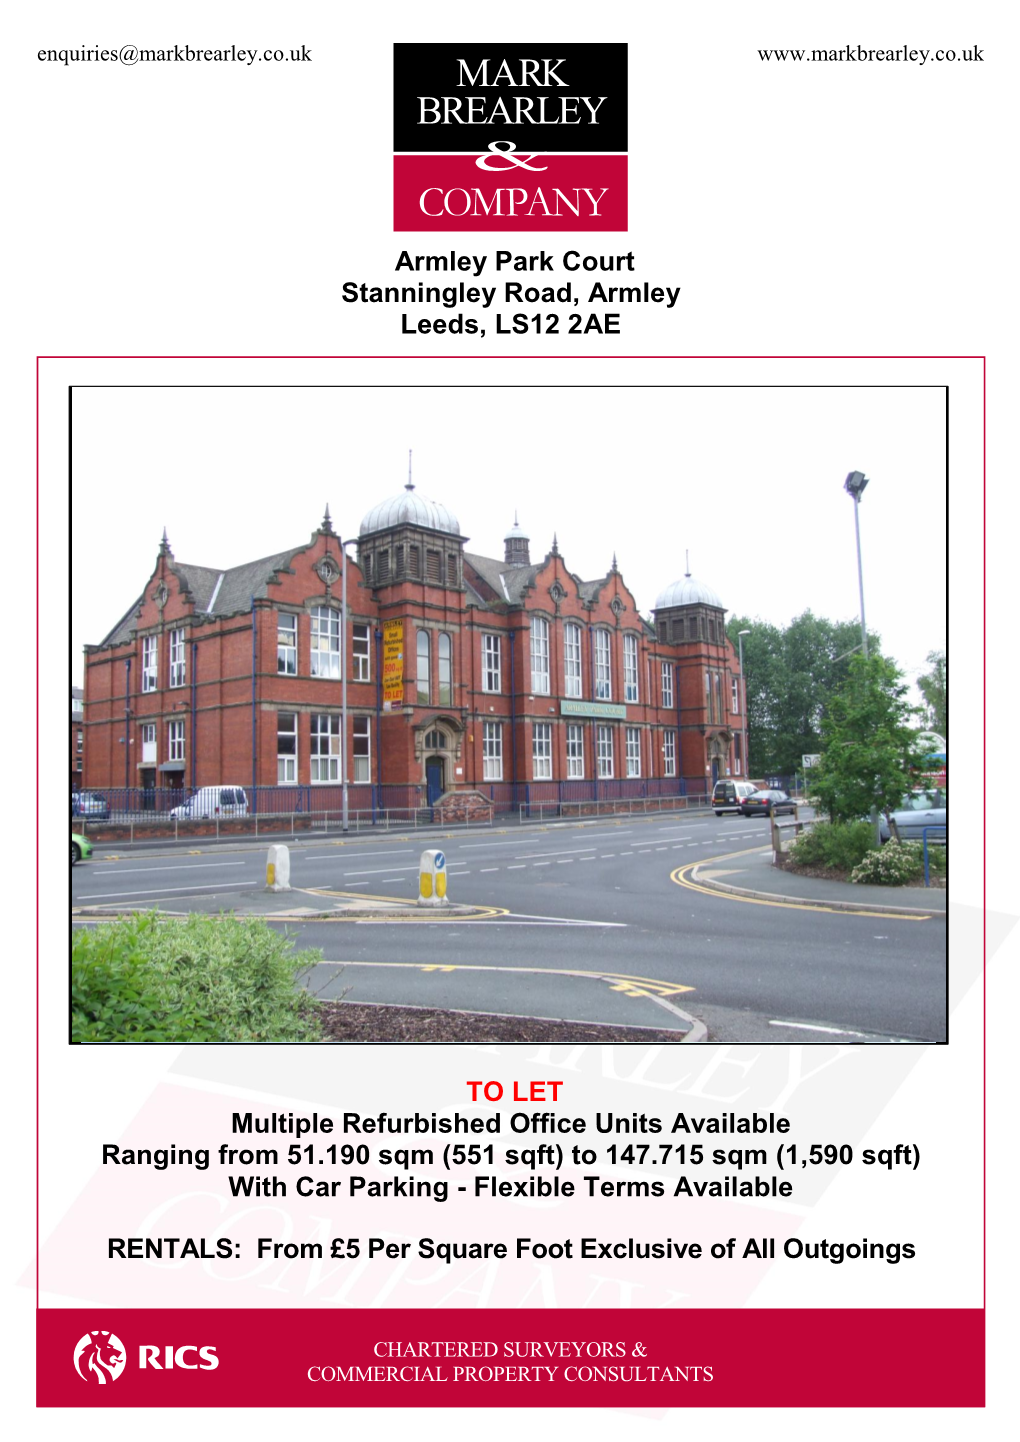 Armley Park Court Stanningley Road, Armley Leeds, LS12 2AE to LET